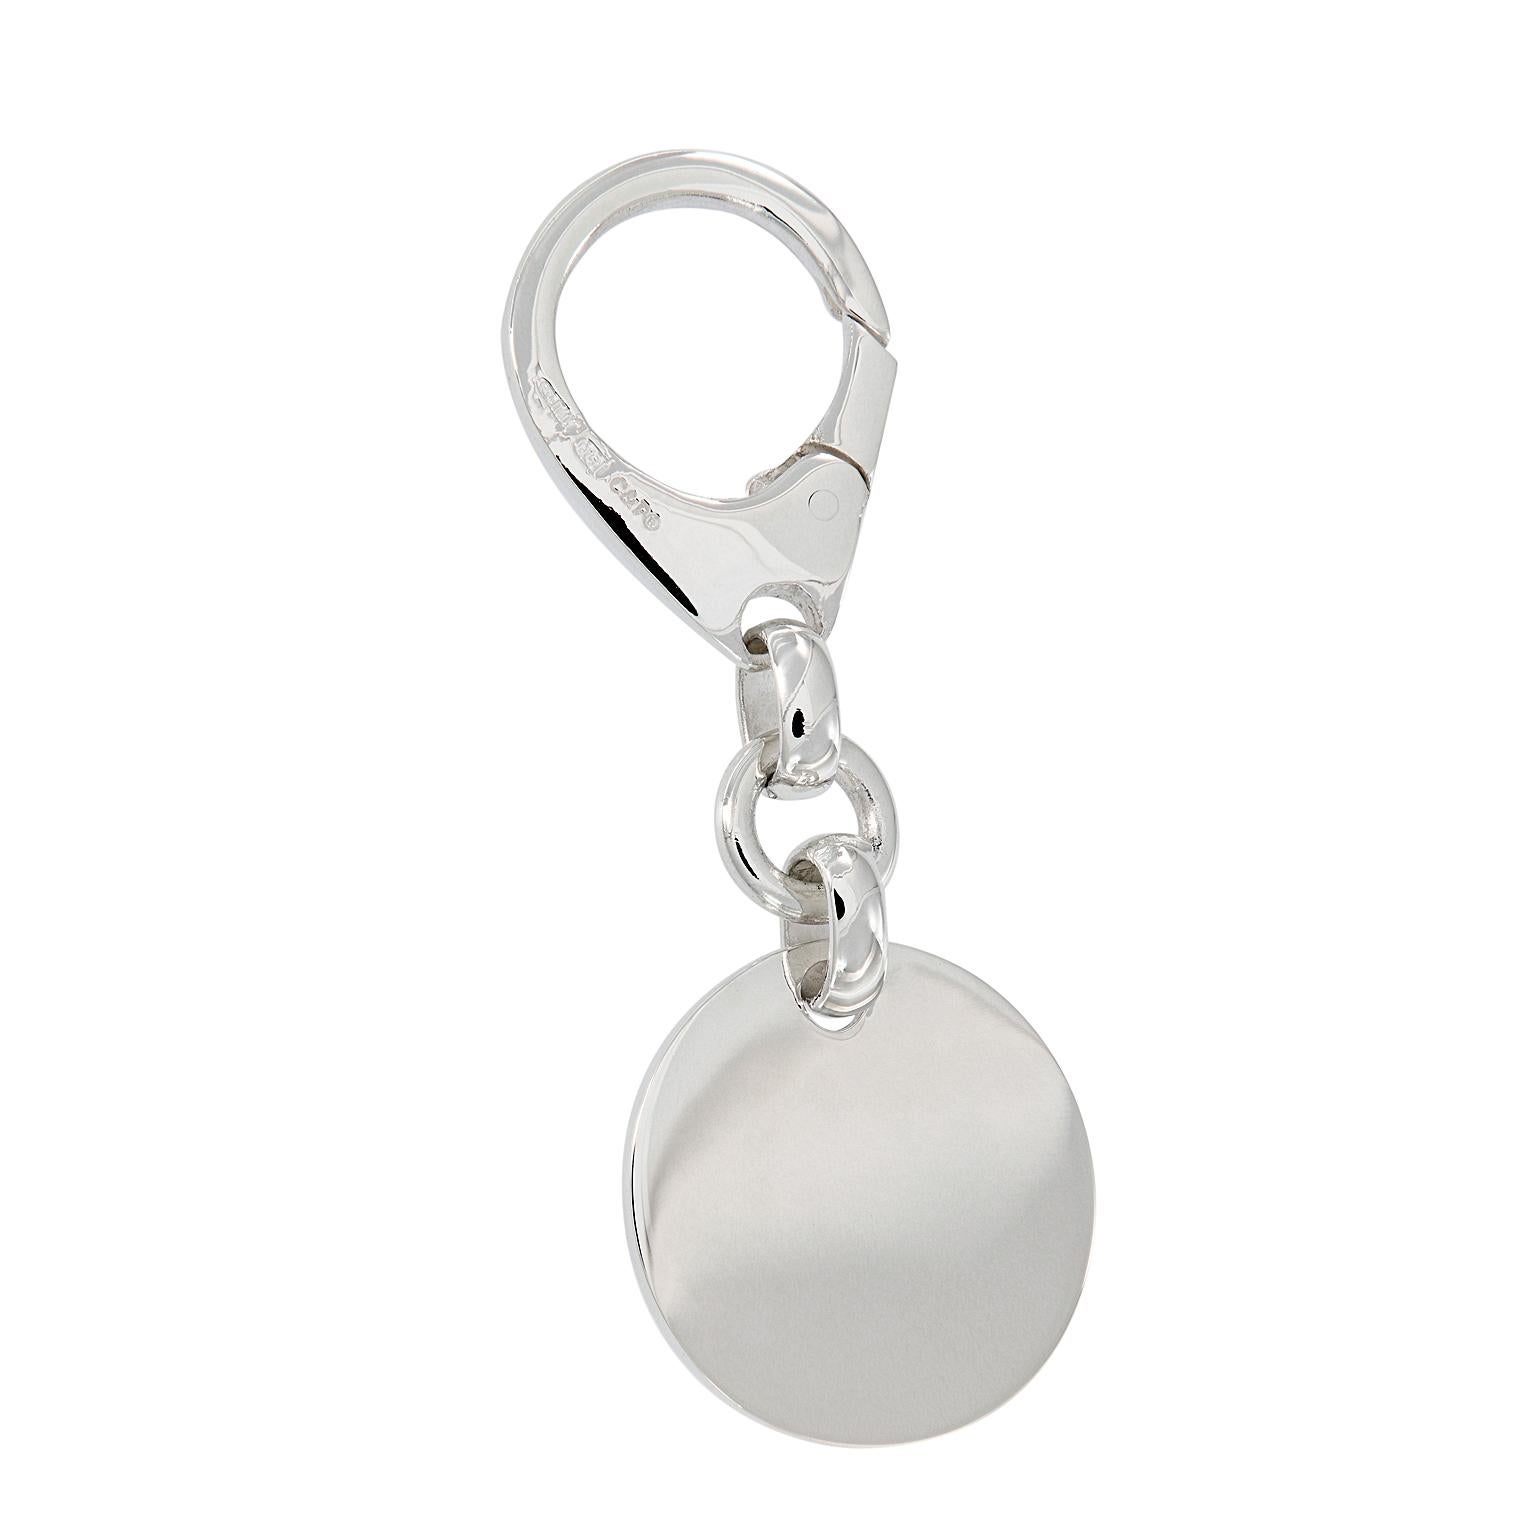 Sterling Silver round charm can be engraved on both the front and reverse side. Charm measures 28mm diameter. Made in Italy.
Weighs 25.1 grams.